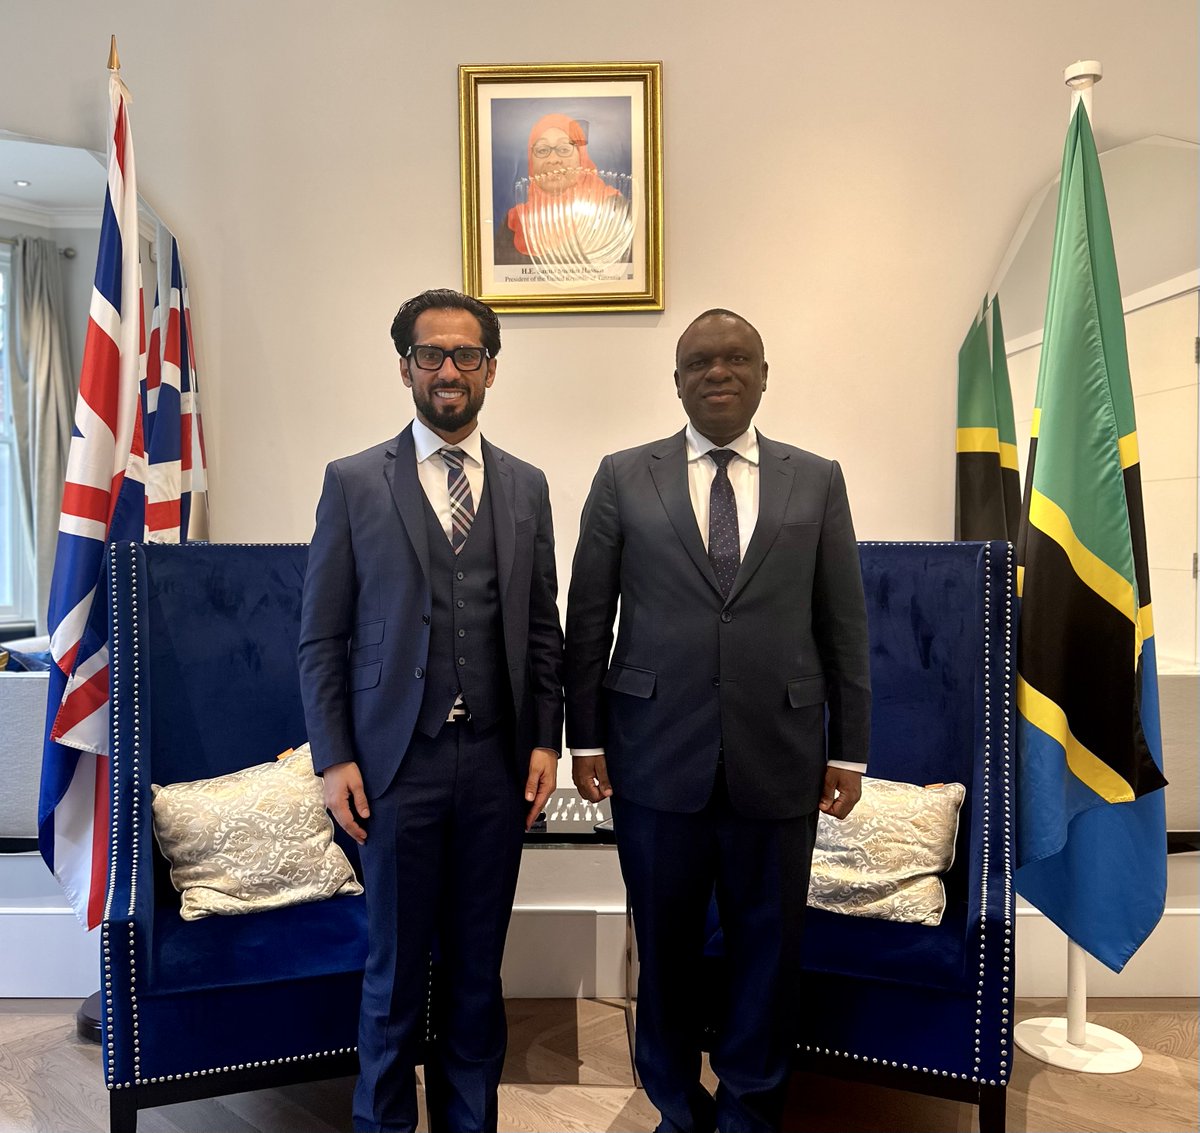 Honored to meet in London with Ambassador Kairuki @MbelwaK, Tanzania’s High Commissioner to the United Kingdom & Wales. We discussed ways to boost UK-Tanzania trade & utilize the Developing Countries Trading Scheme for @MeTL_Group textile products, opening doors for business…